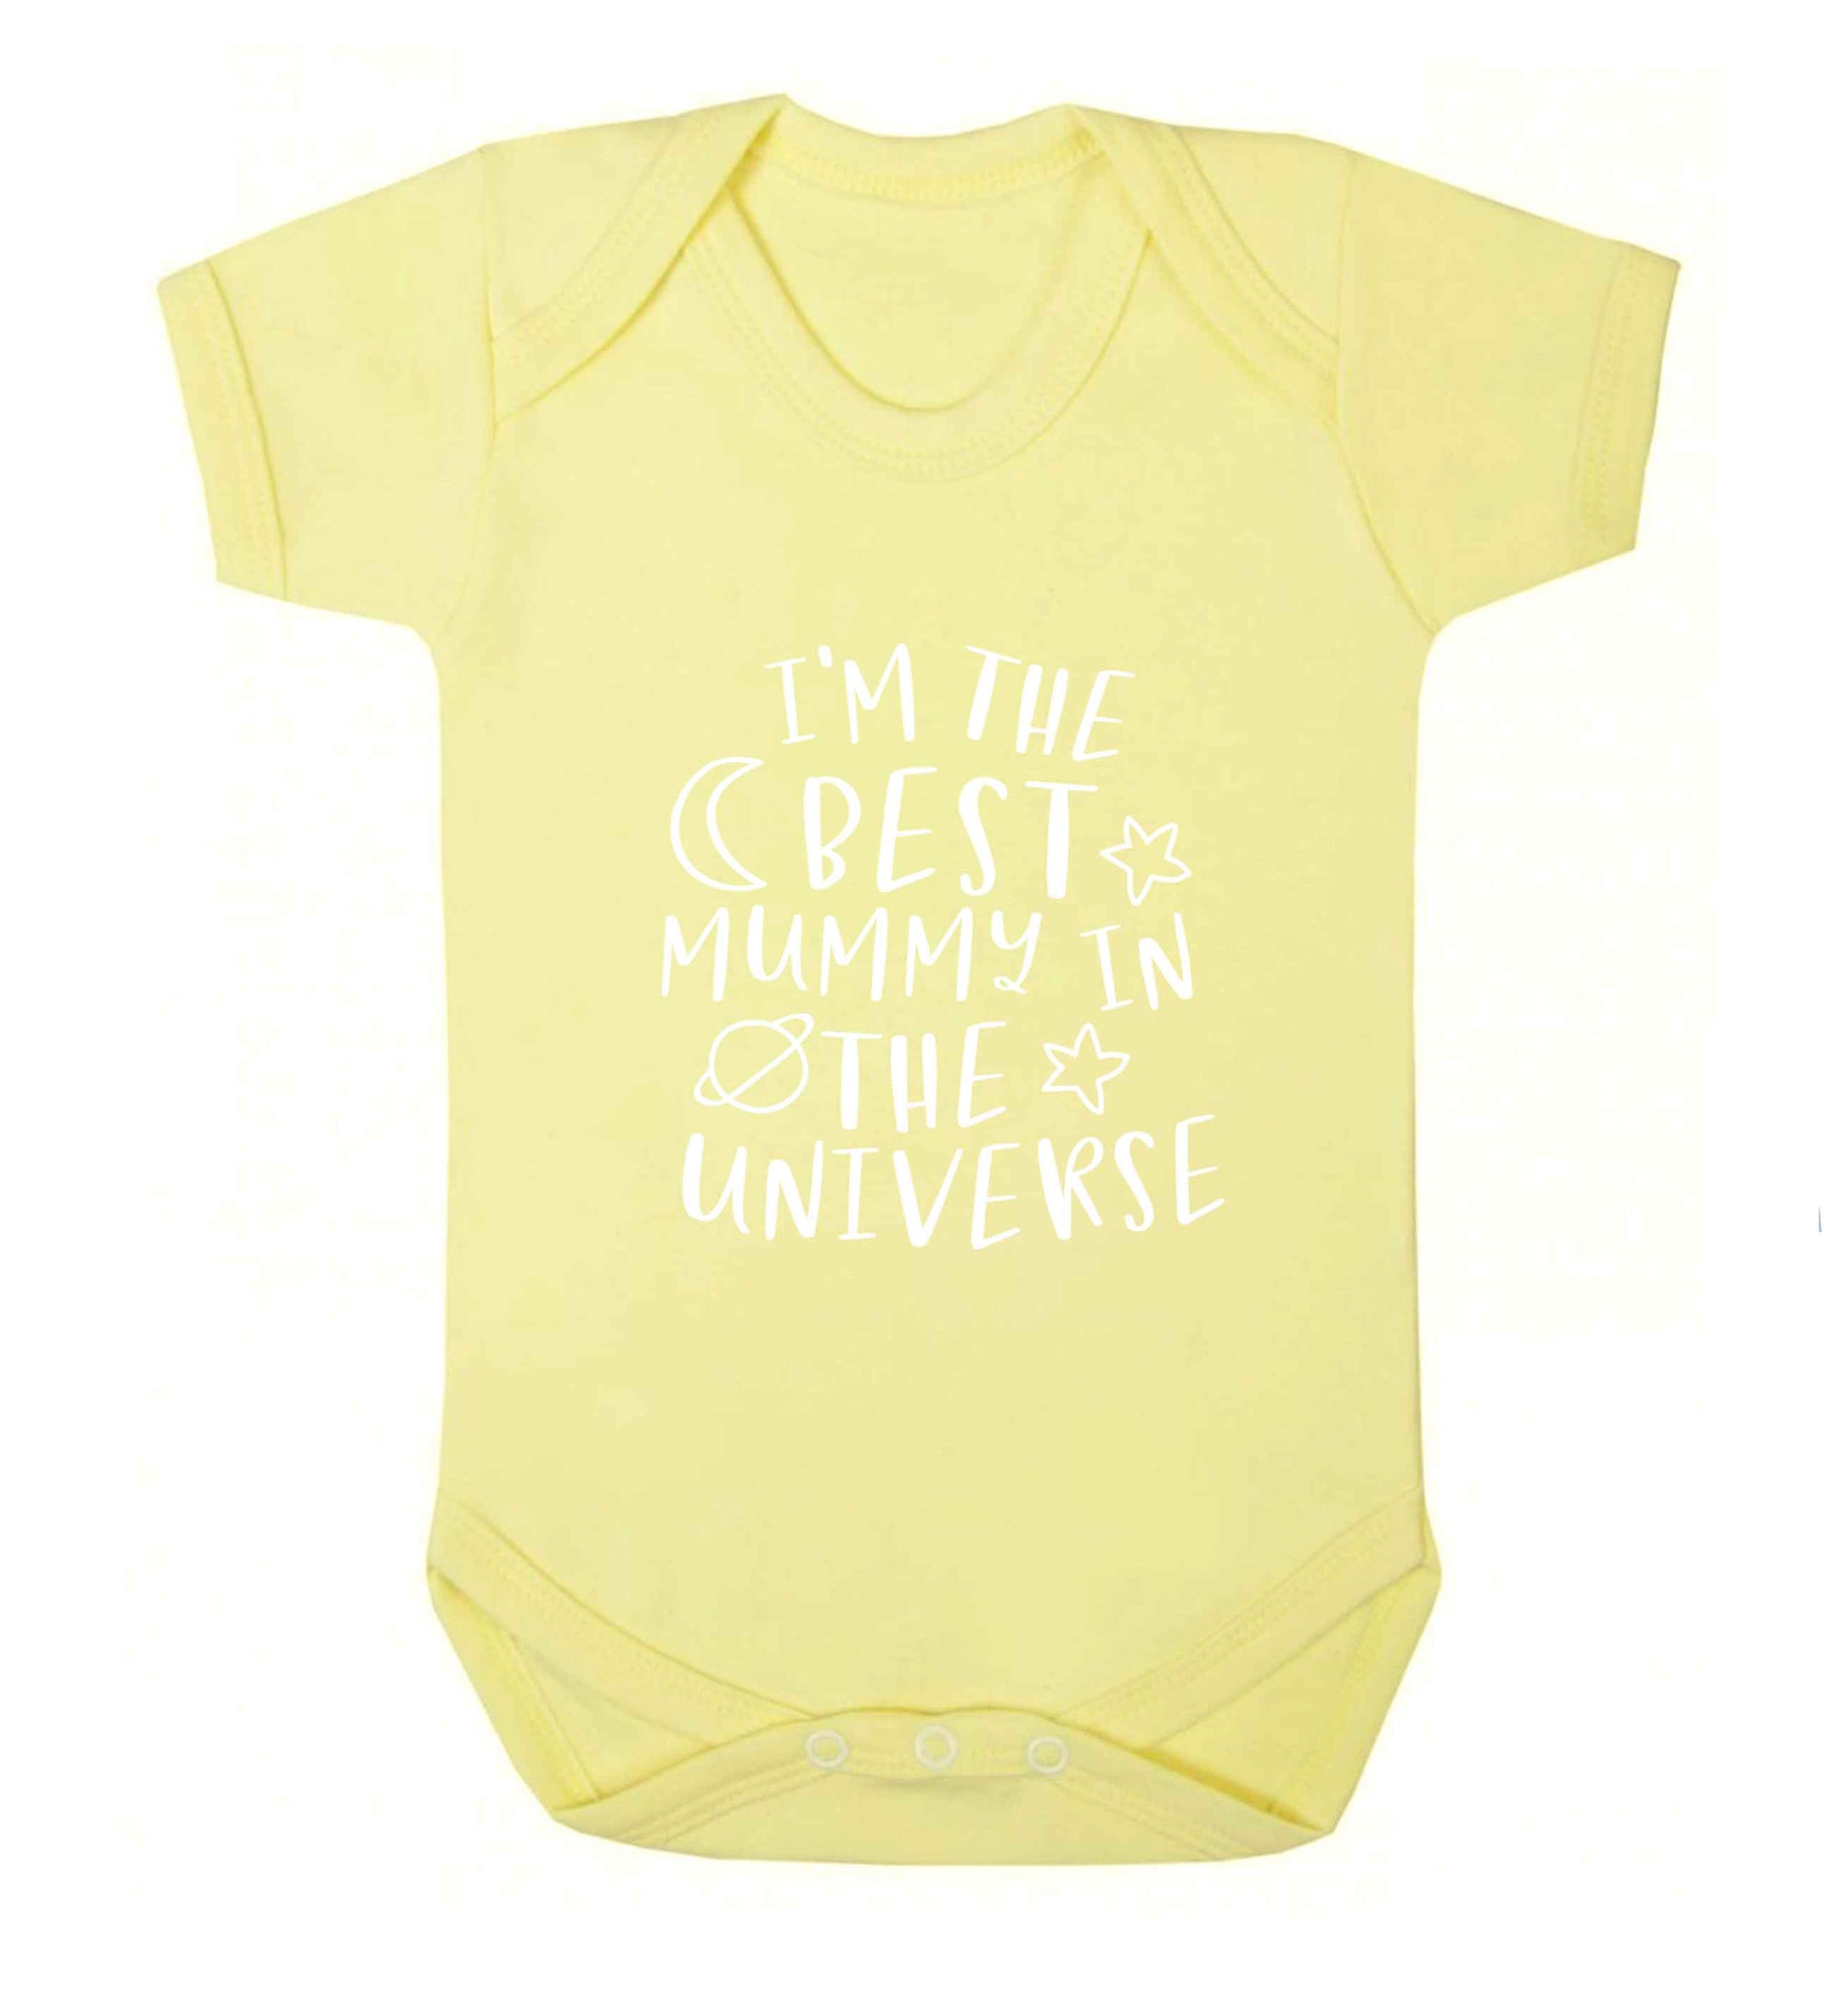 I'm the best mummy in the universe baby vest pale yellow 18-24 months